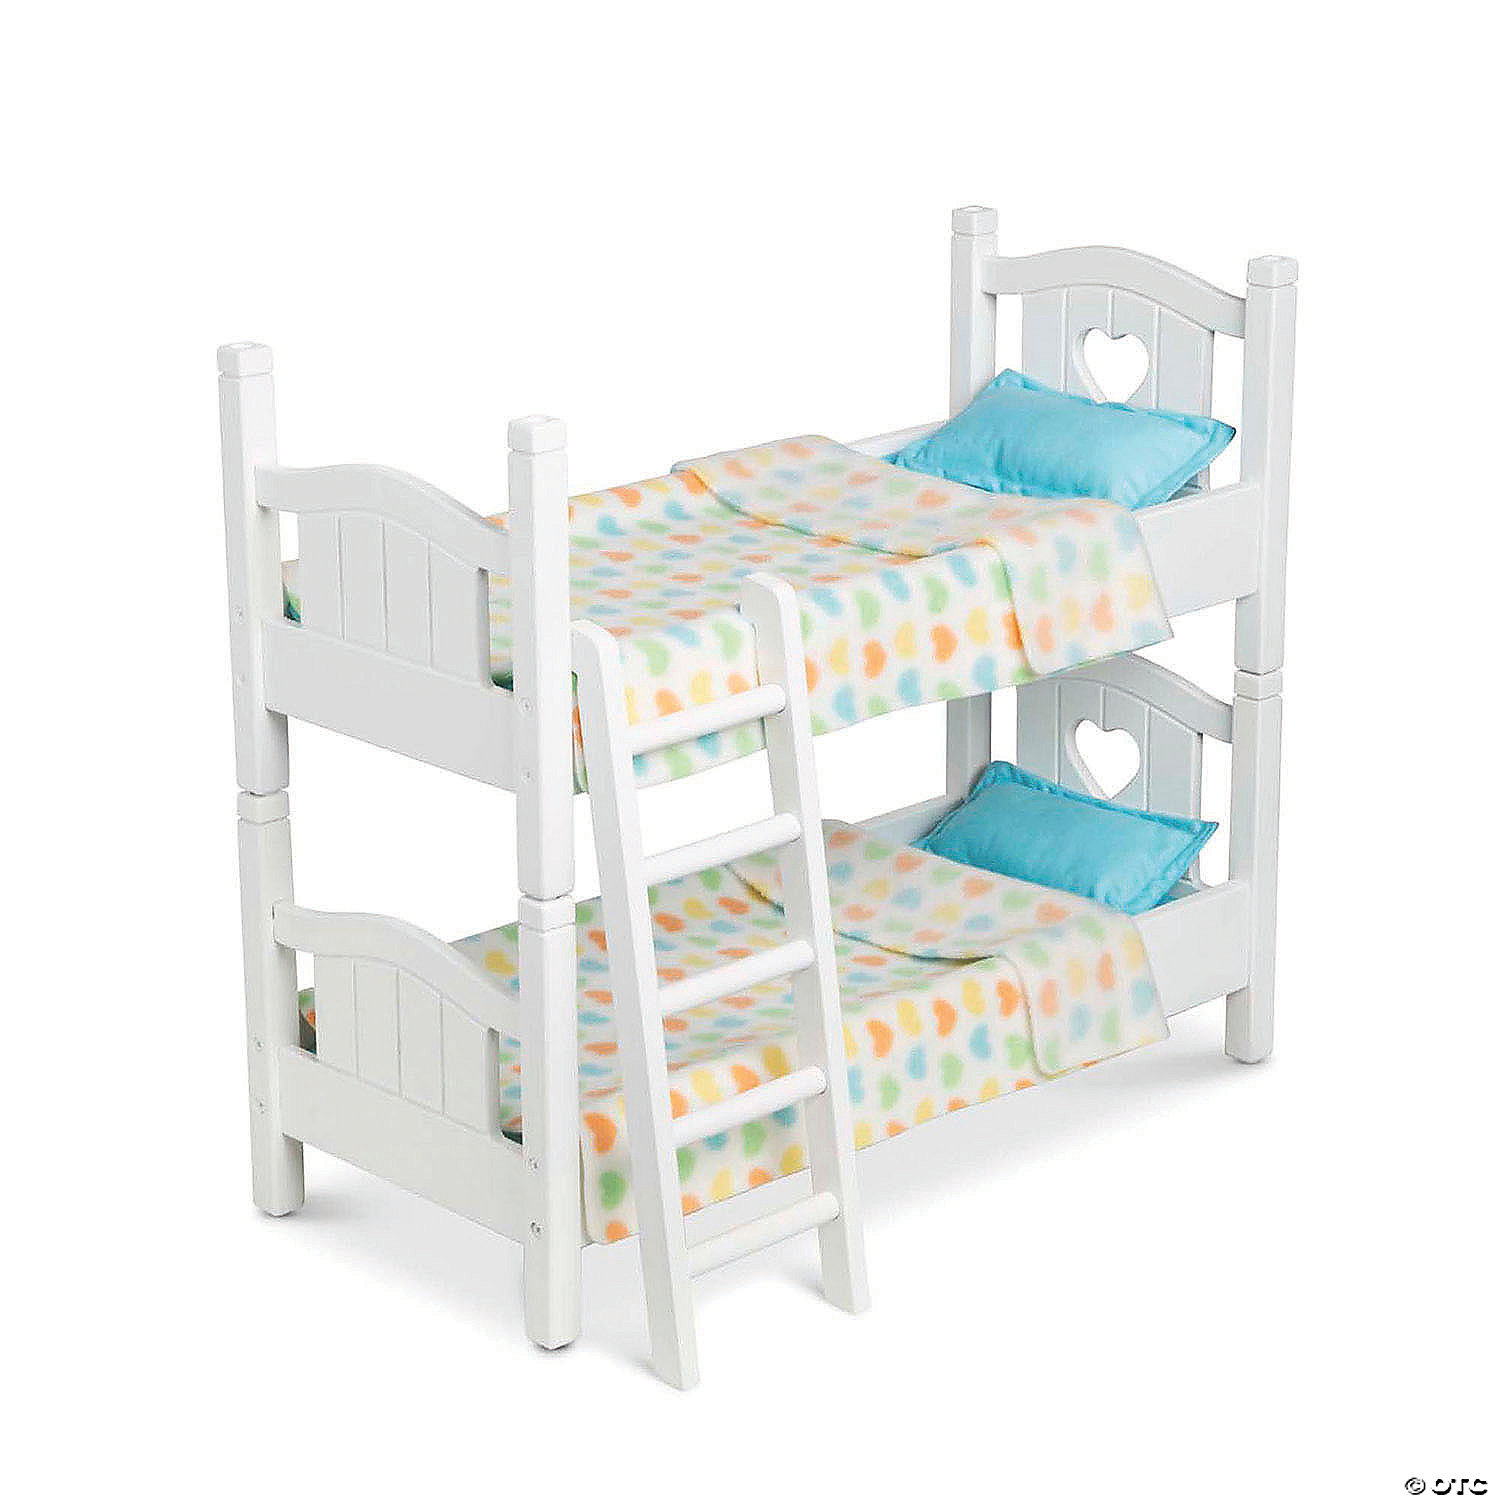 Doug Mine To Love Play Bunk Bed, Guidecraft Bunk Beds